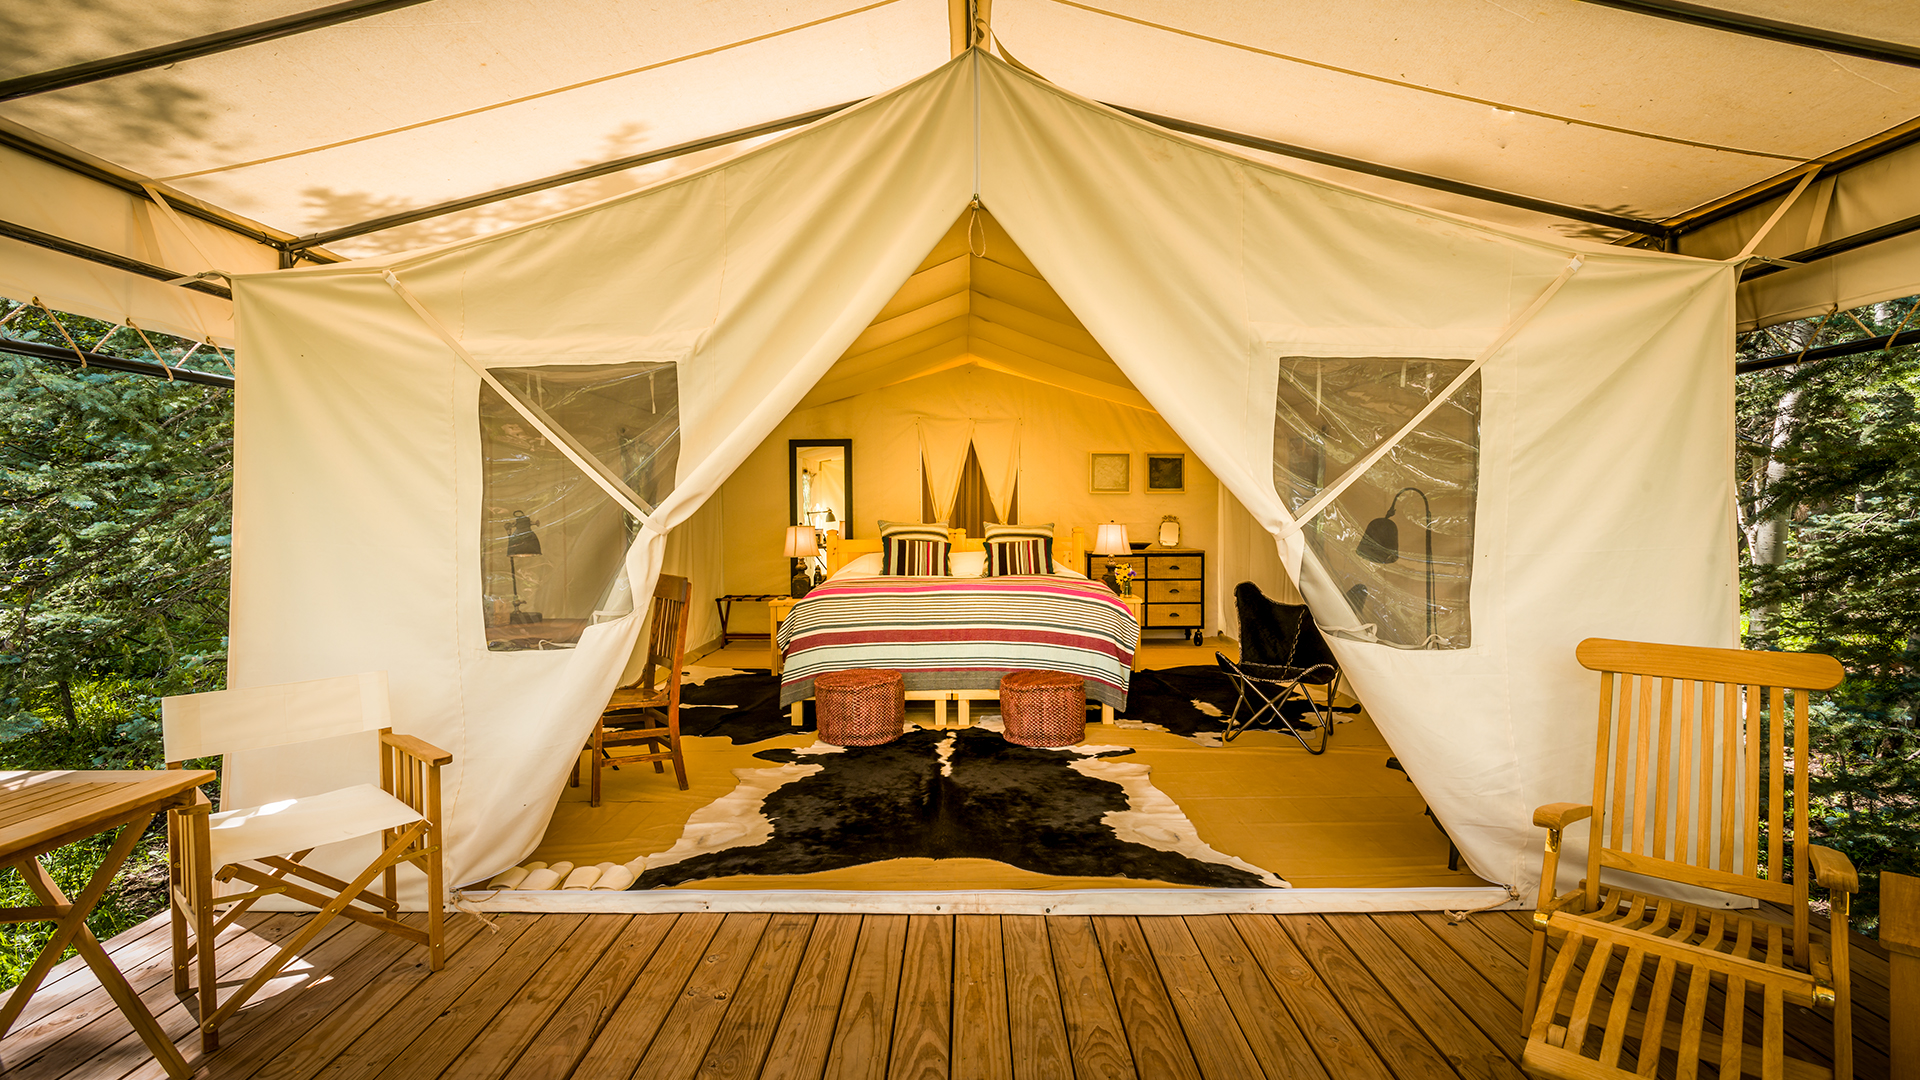 While there are plenty of activities on offer at Dunton River Camp, you could also simply relax outside your tent.